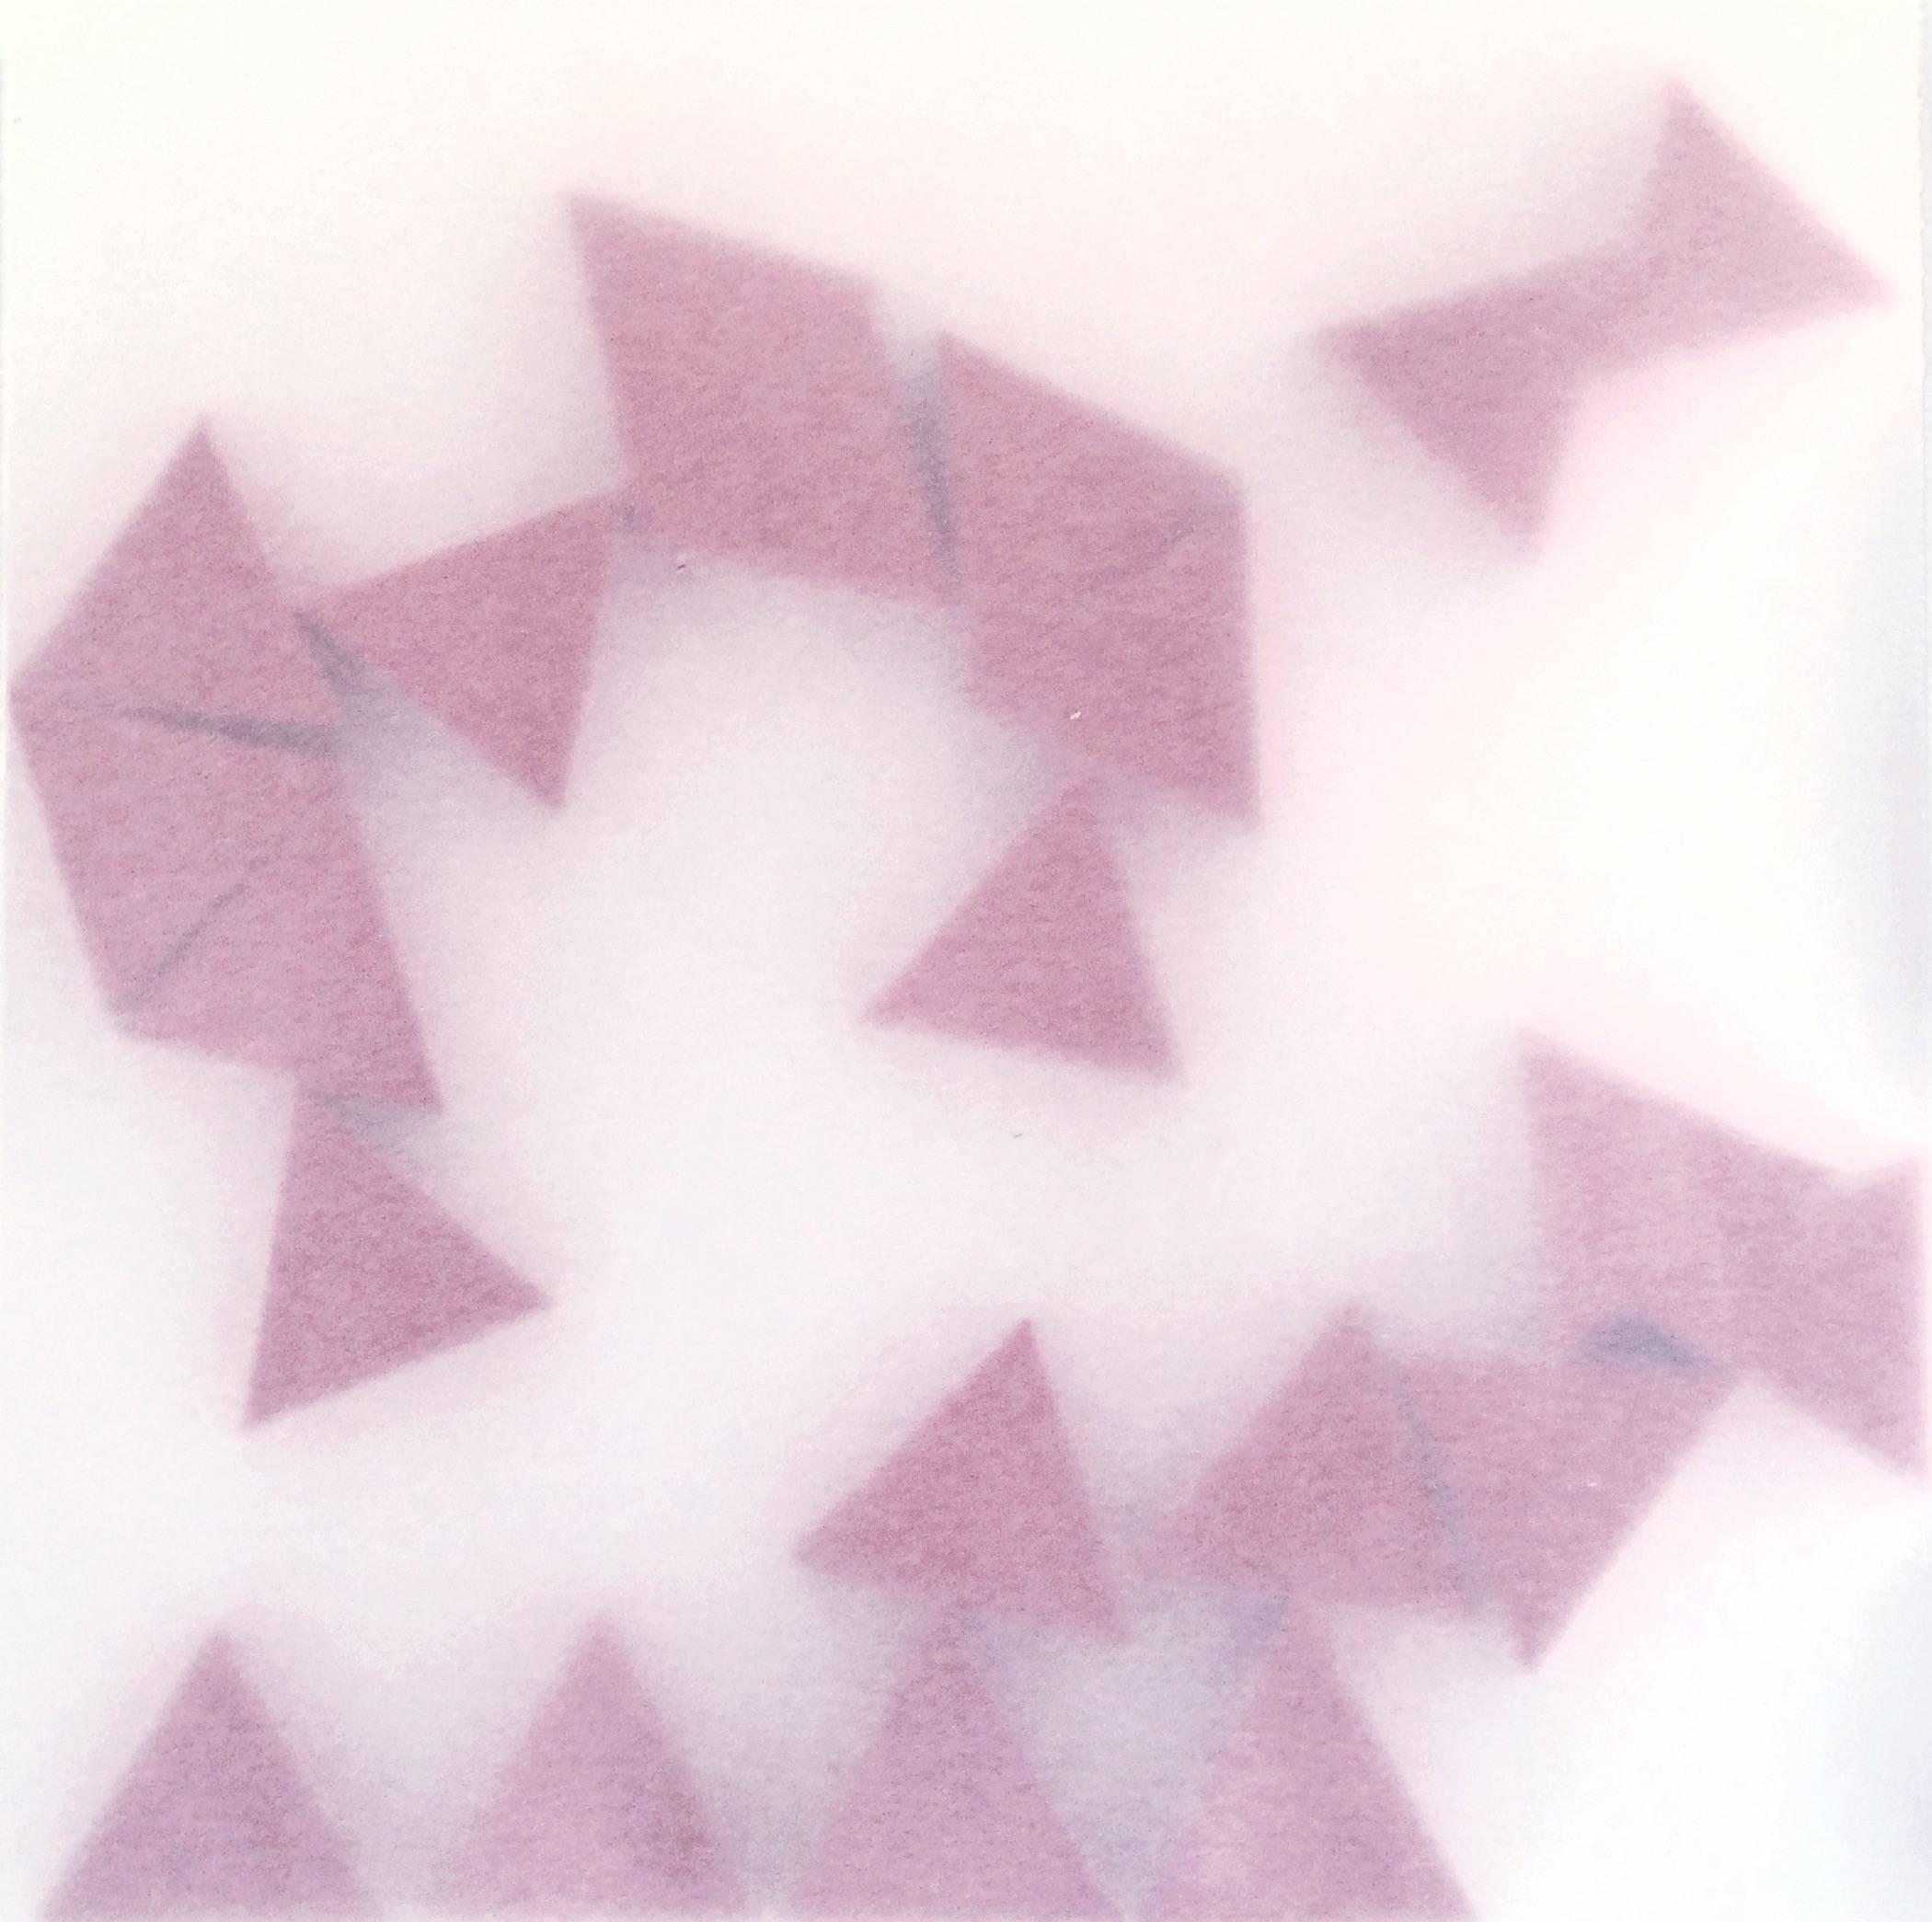 Norma Marquez Orozco, 'Red Triangles (21 Triangles Series)', 2014, Paper 